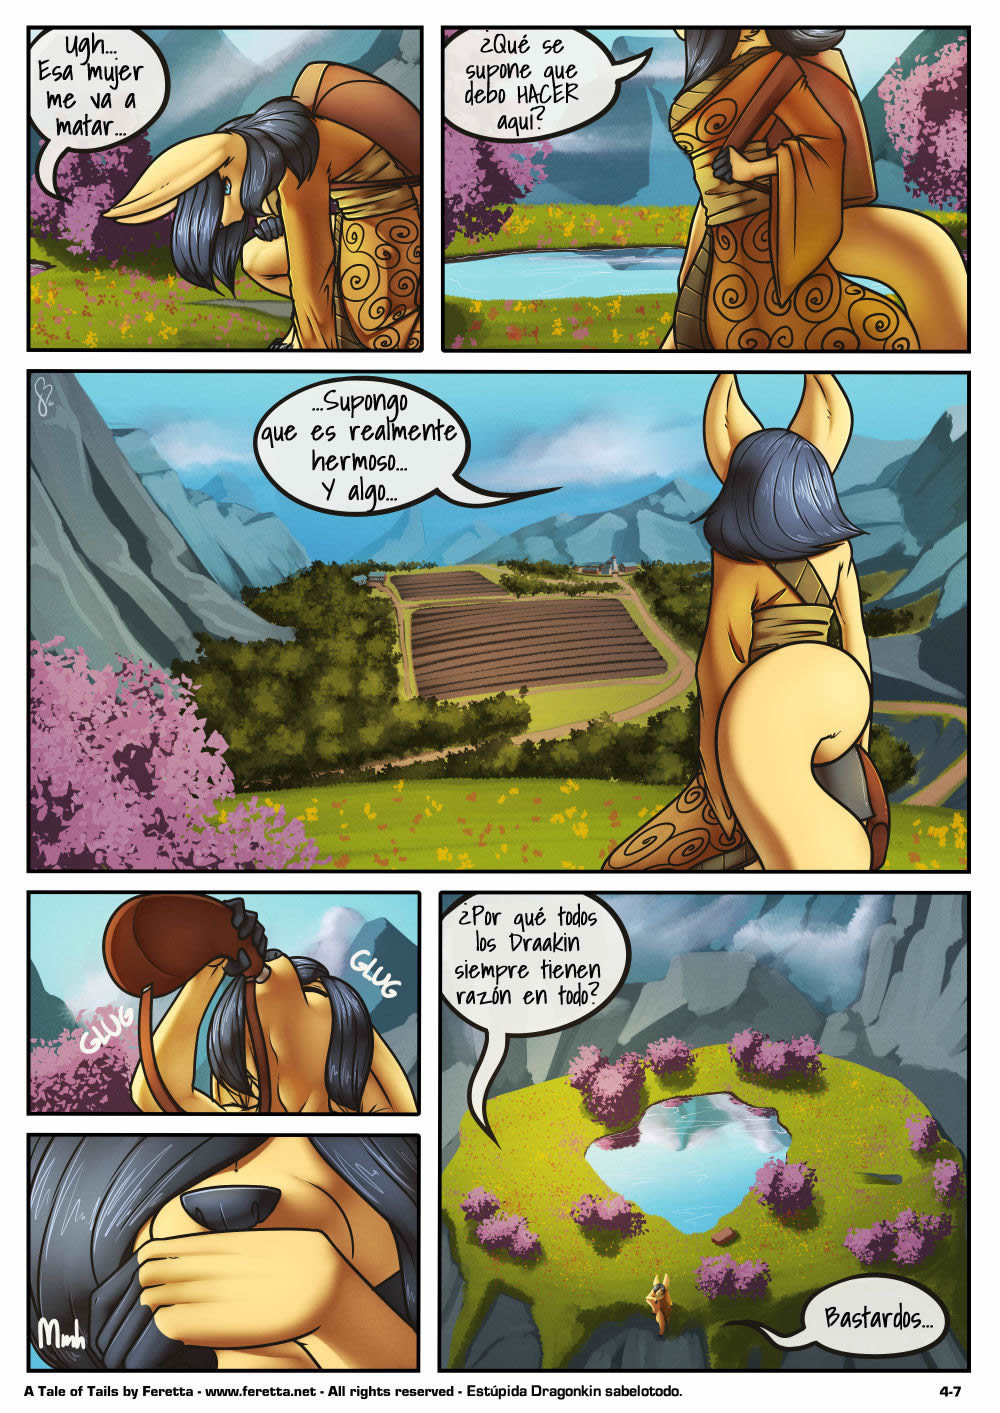 A Tale of Tails 4 - 6